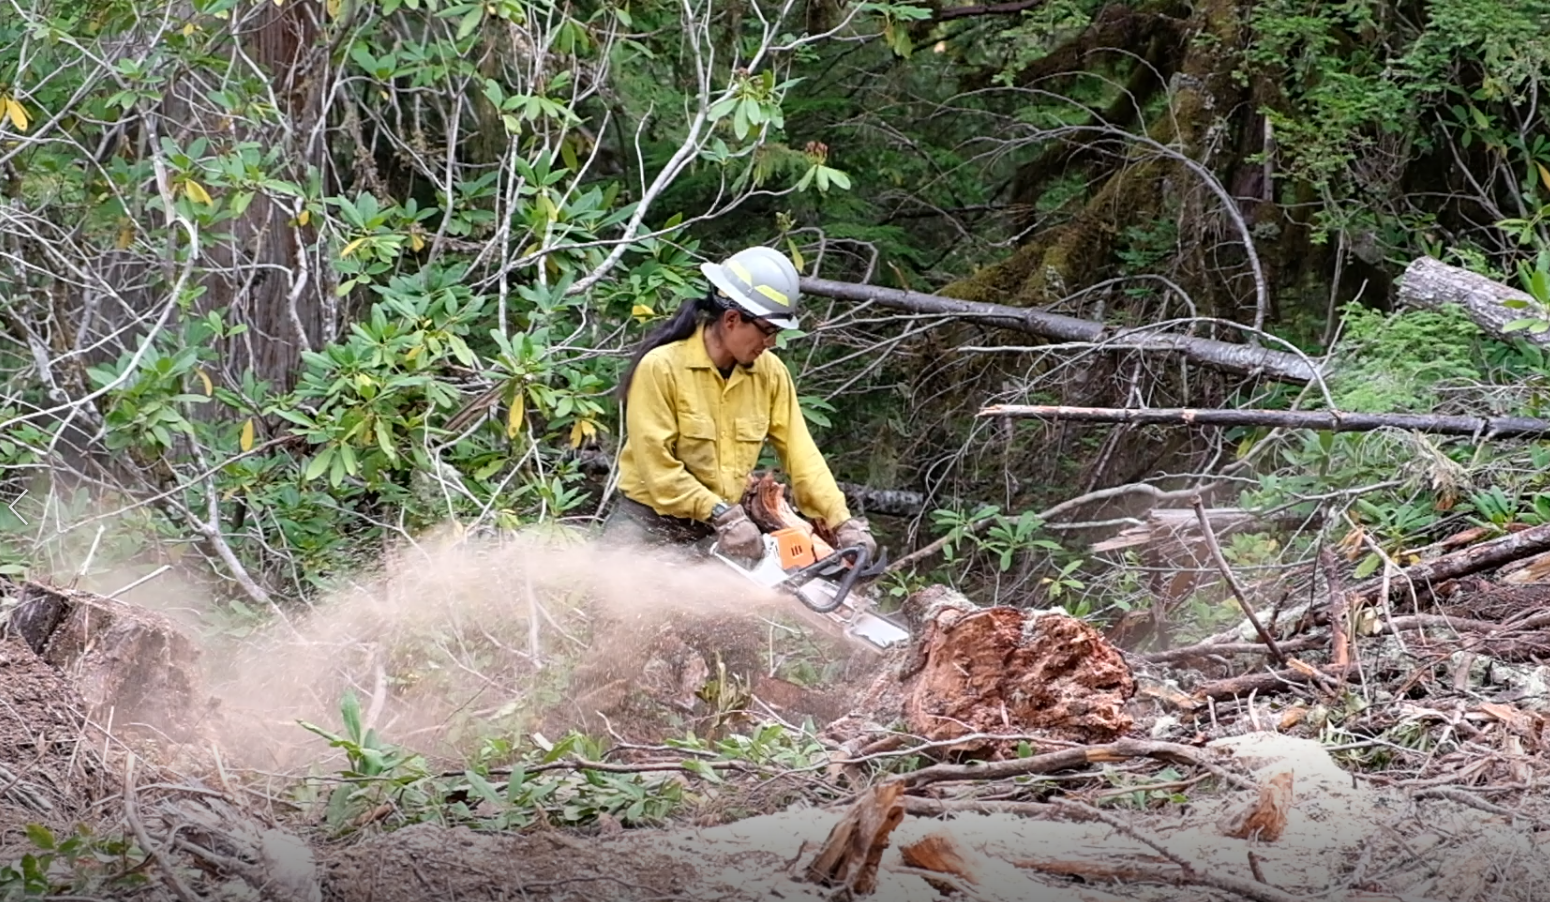 chips can be seen flying behind a firefighter as chainsaw is used to cut a log